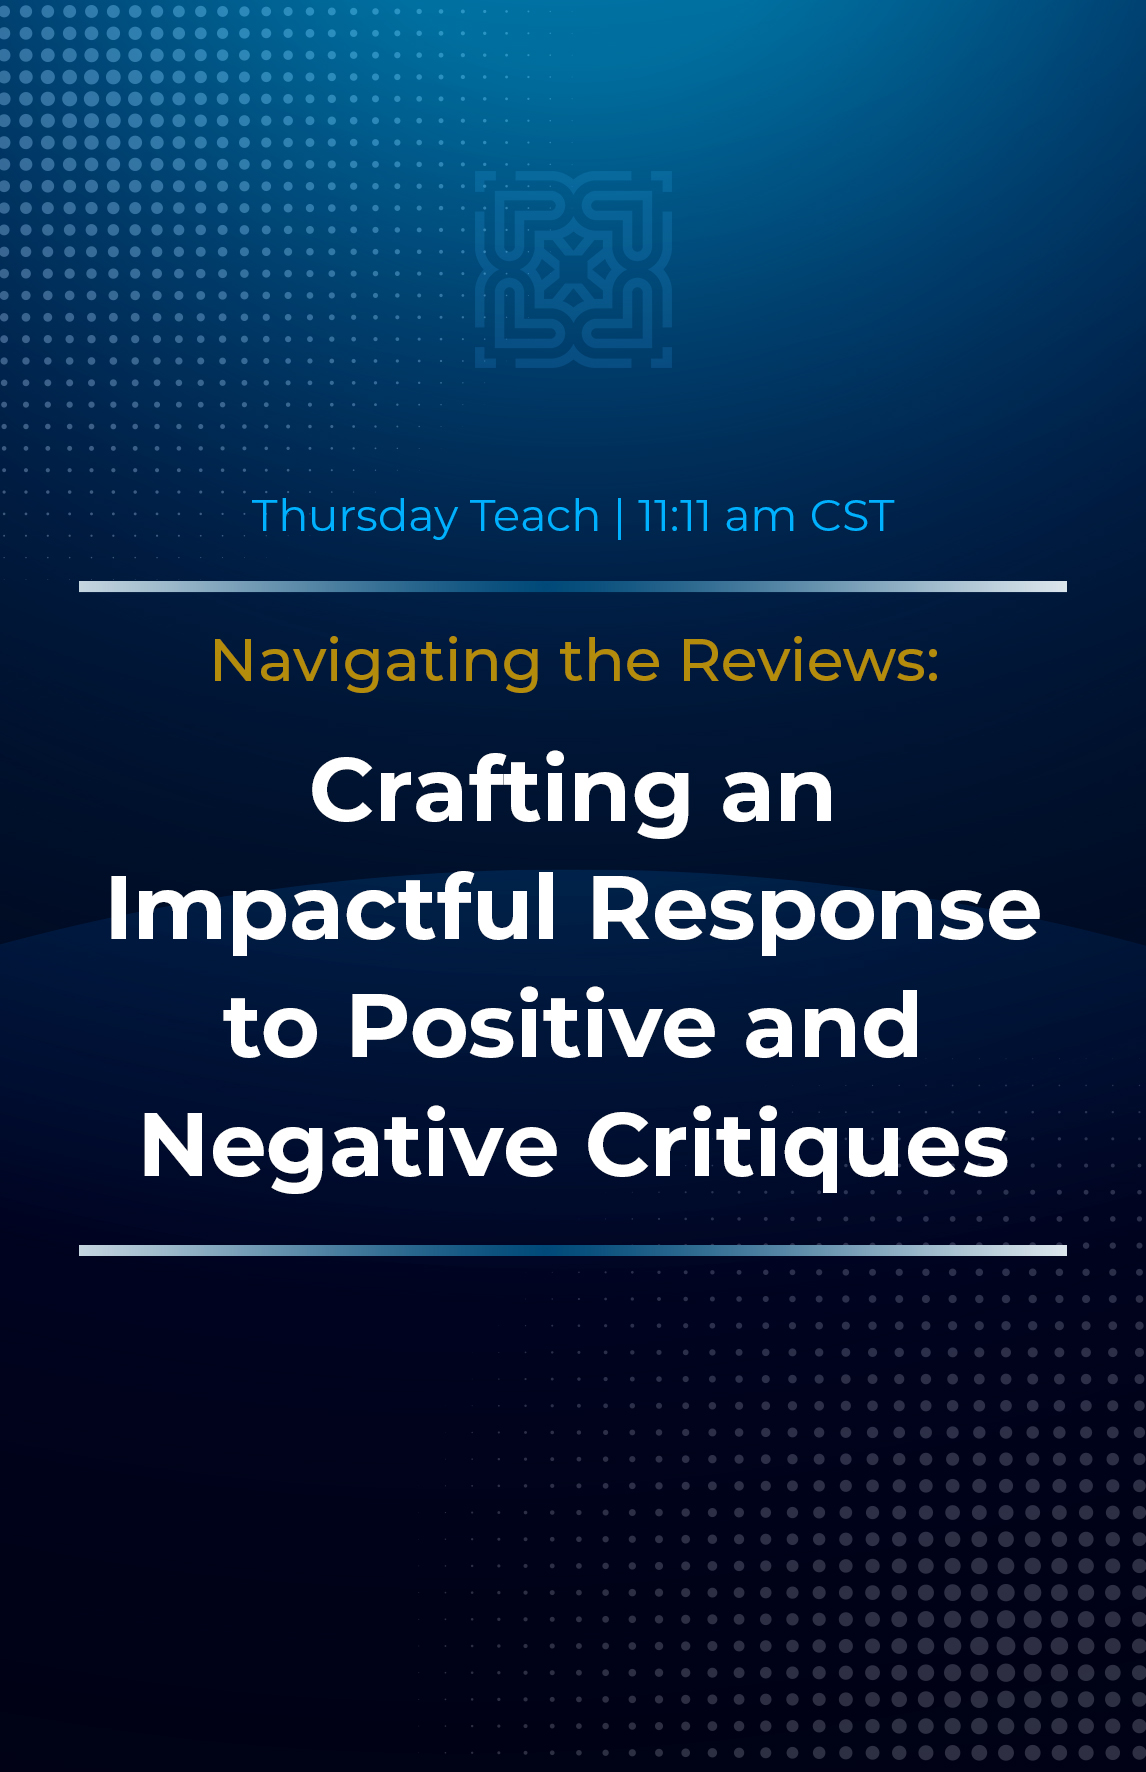 Crafting an Impactful Response to Positive and Negative Critiques